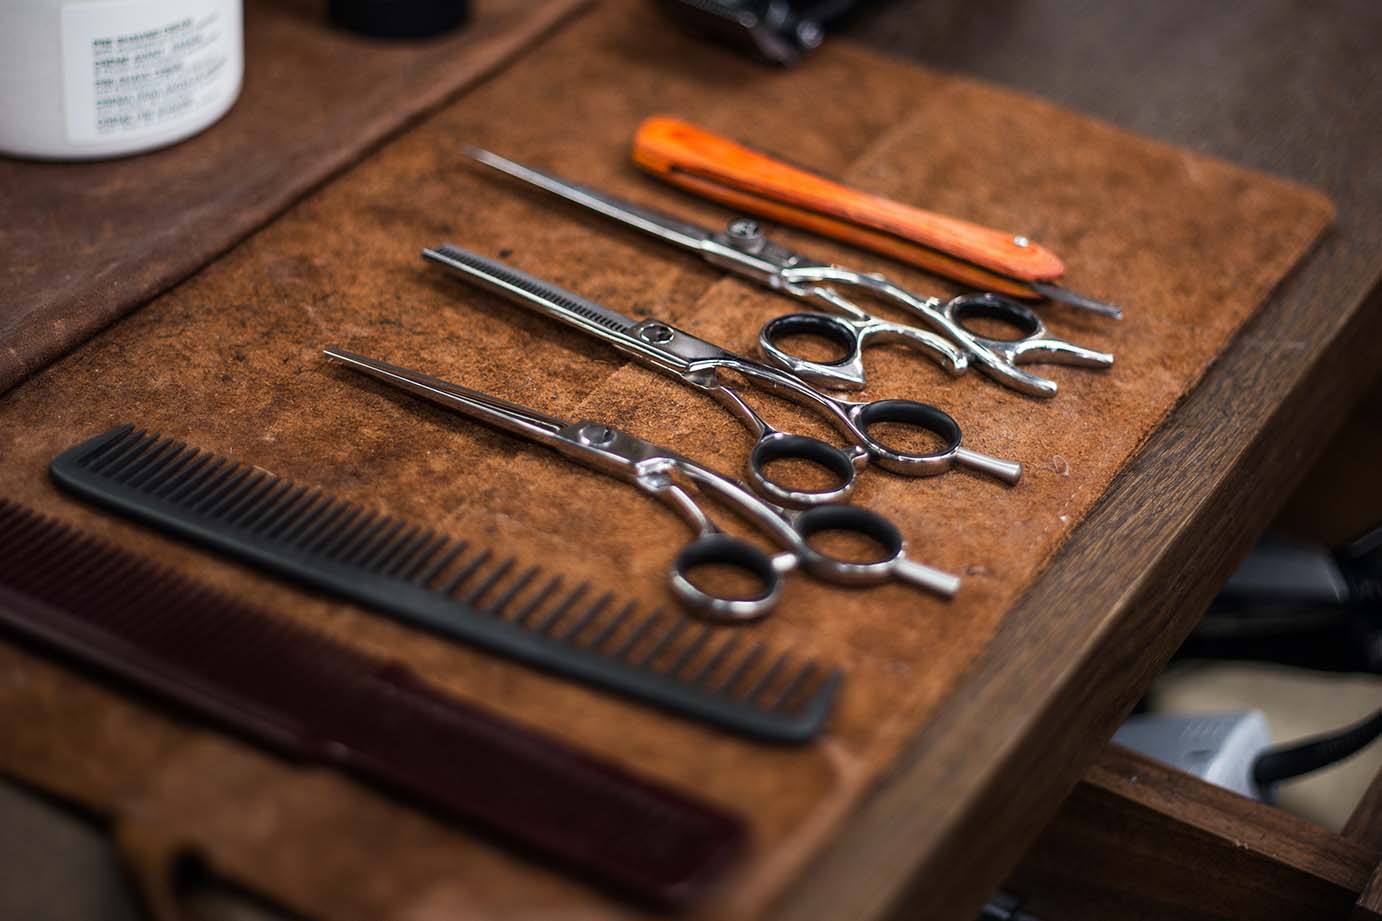 Scissors and other tools on a towel on a work station in a salon; promoting your salon keeps customers & referrals